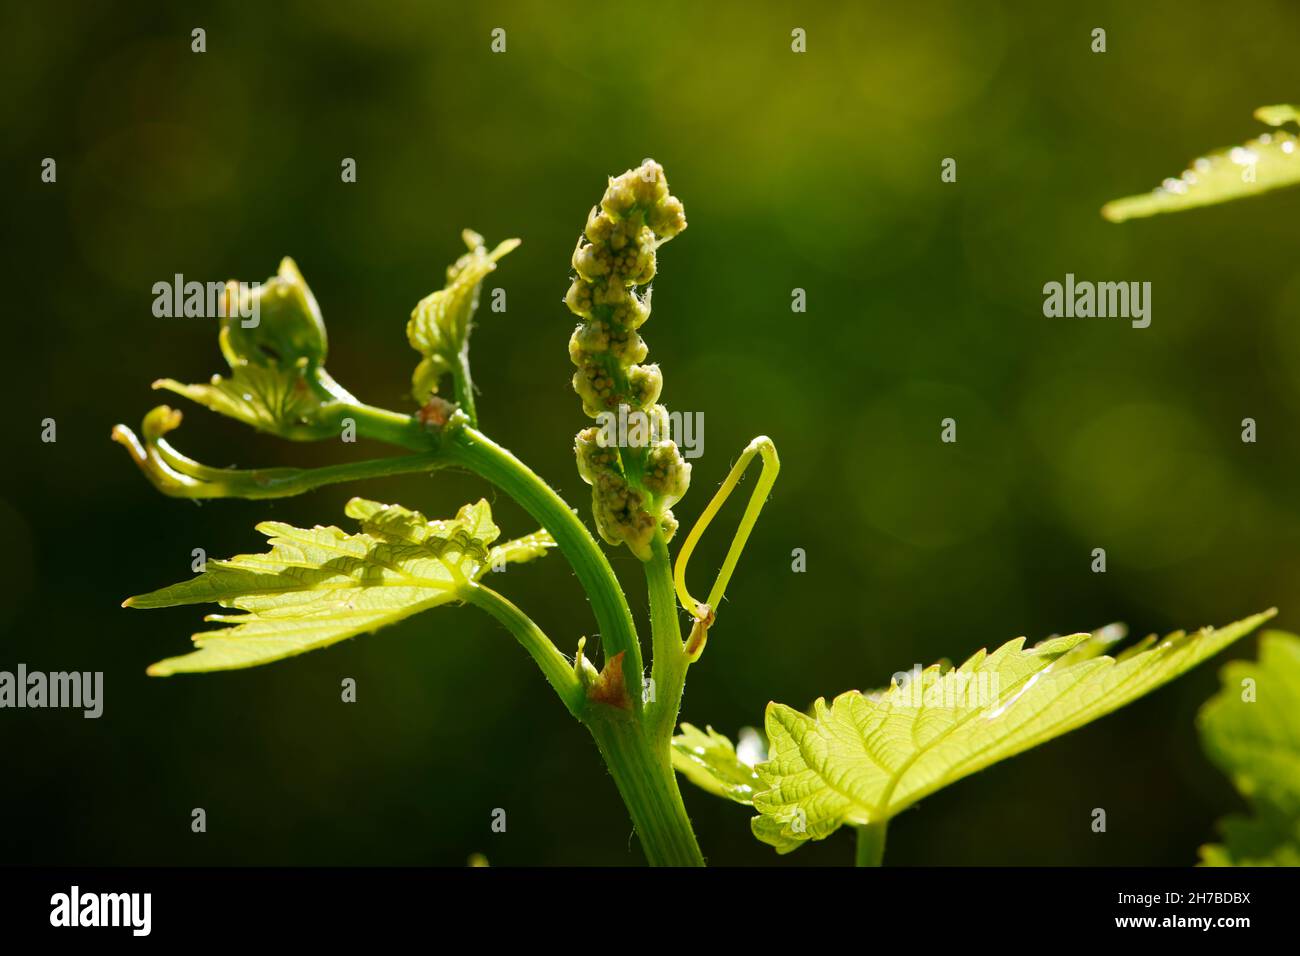 Flower bud on Sultana grape vine already showing basic shape of the bung that will develop after flowerng. Stock Photo